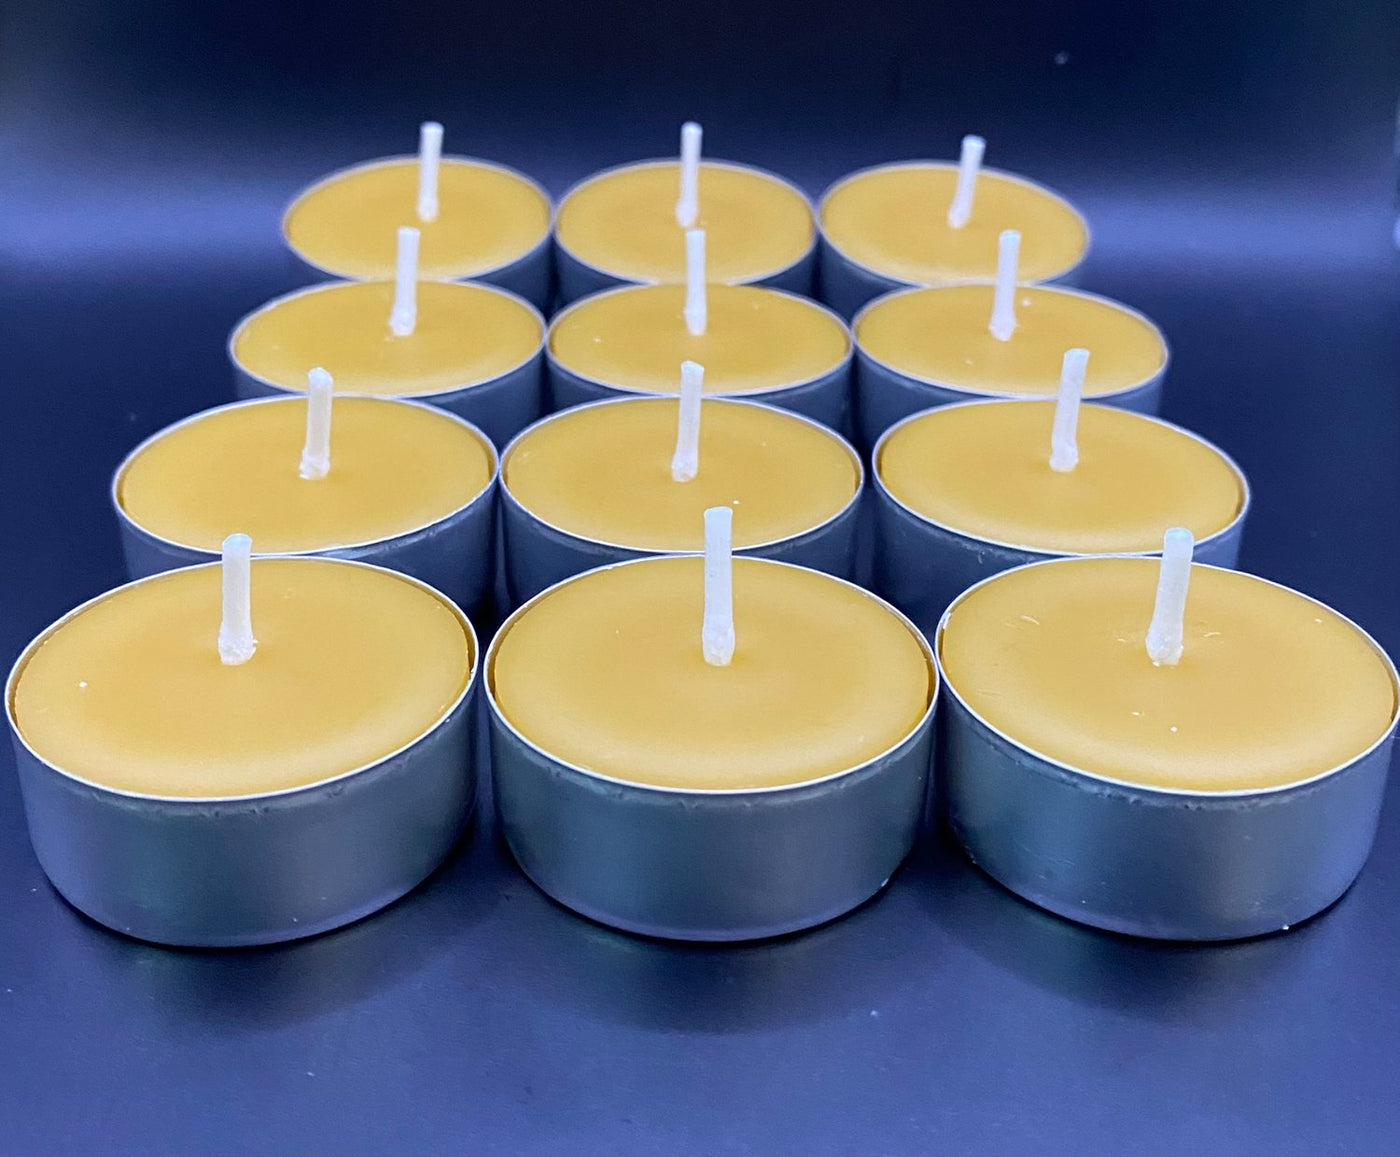 Tealight Beeswax Candles - 4 pack